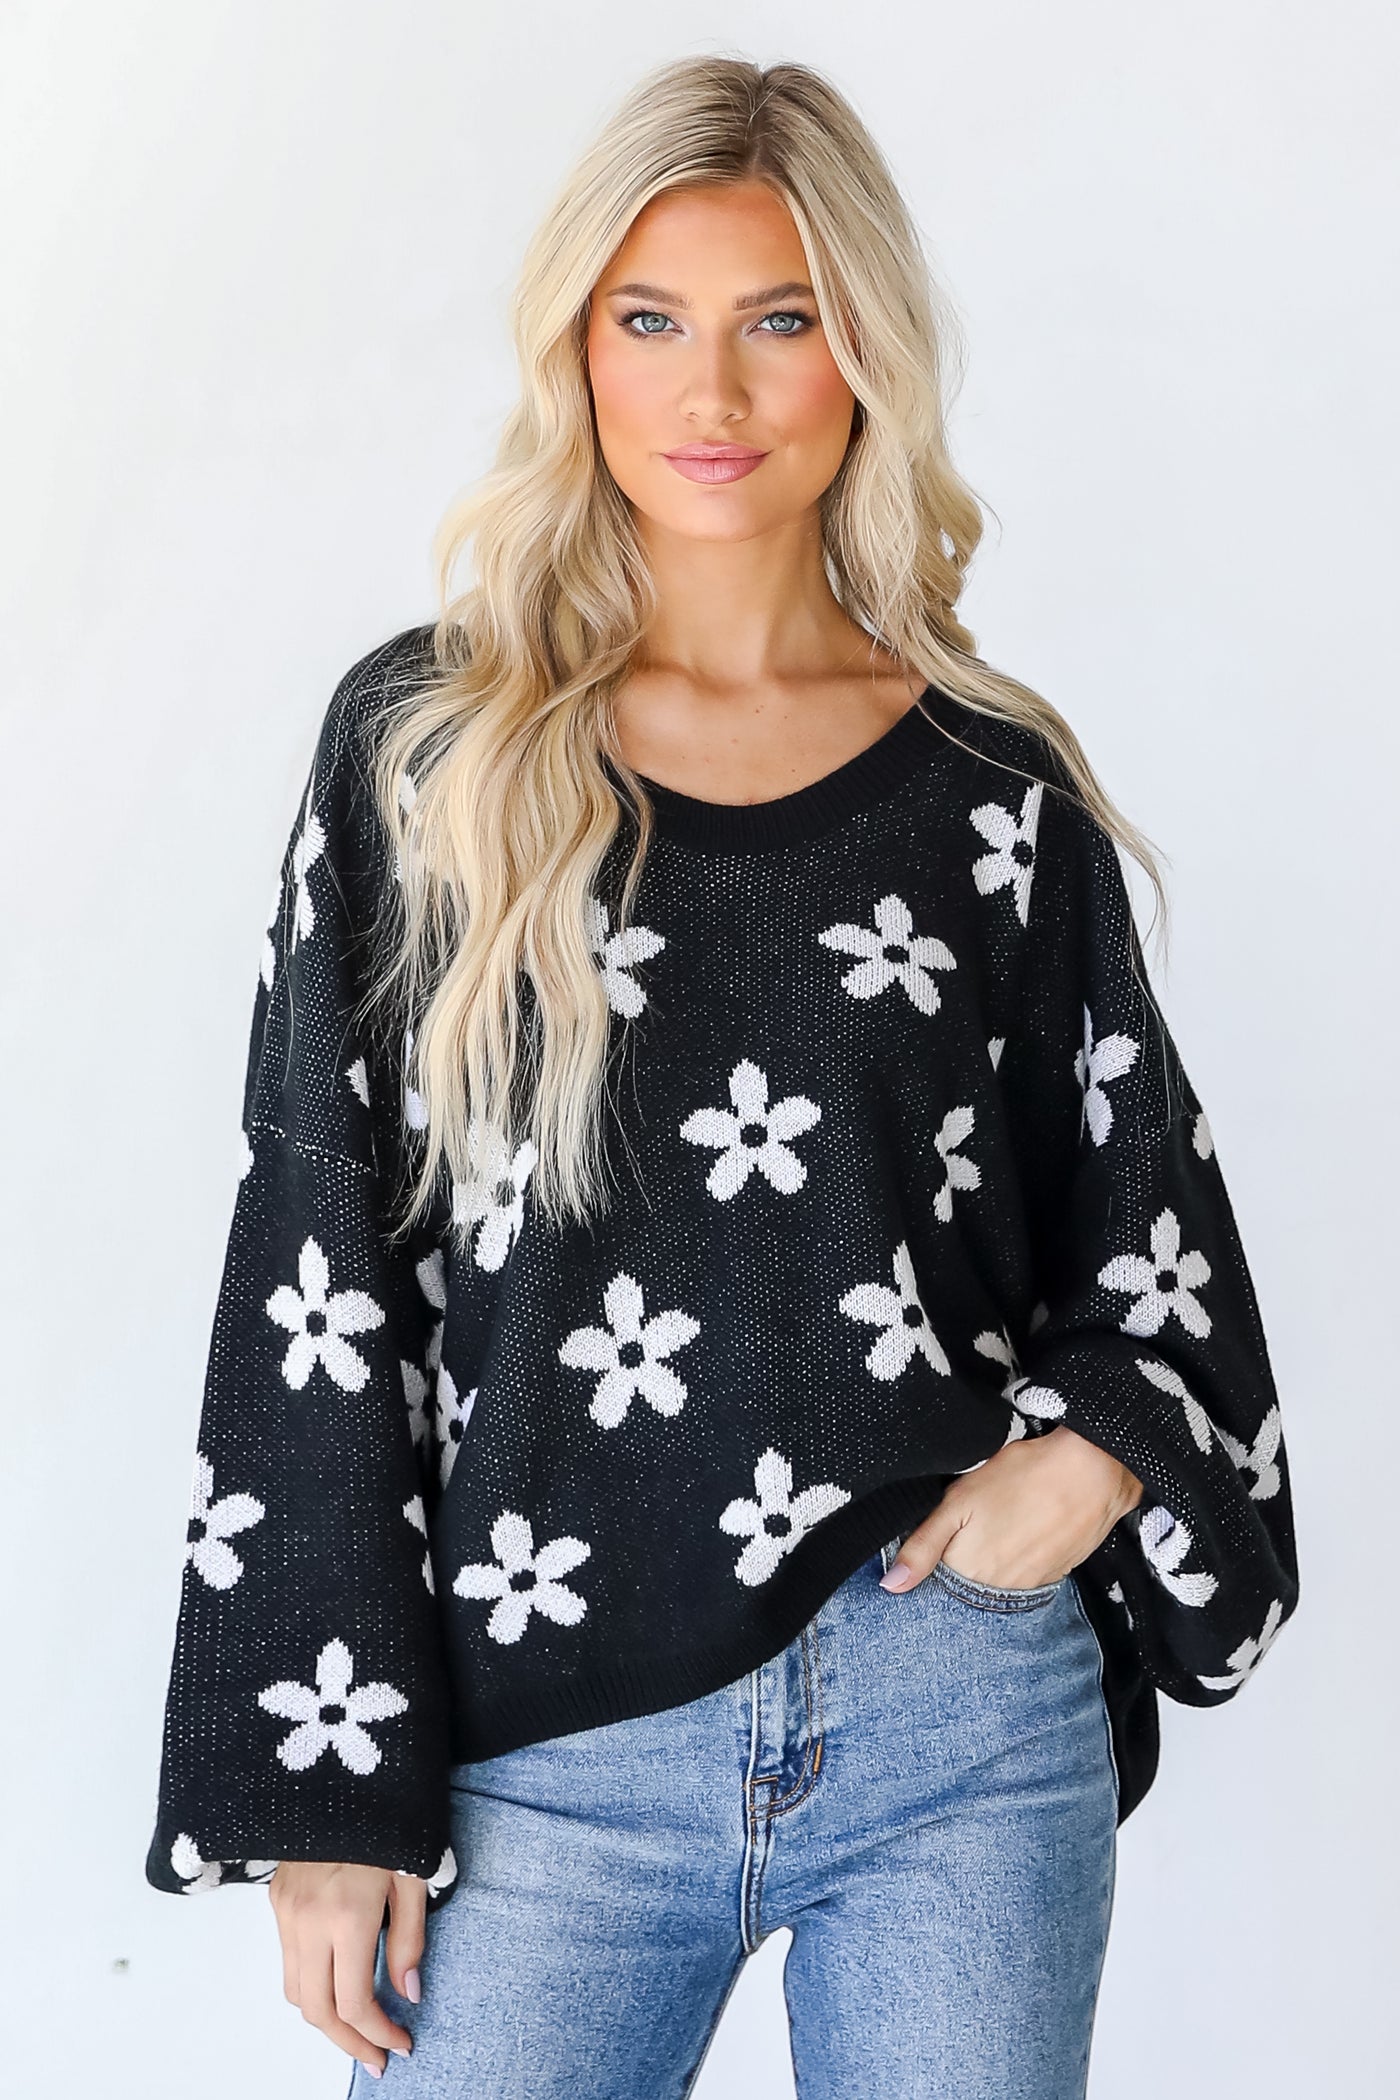 Daisies Sweater from dress up